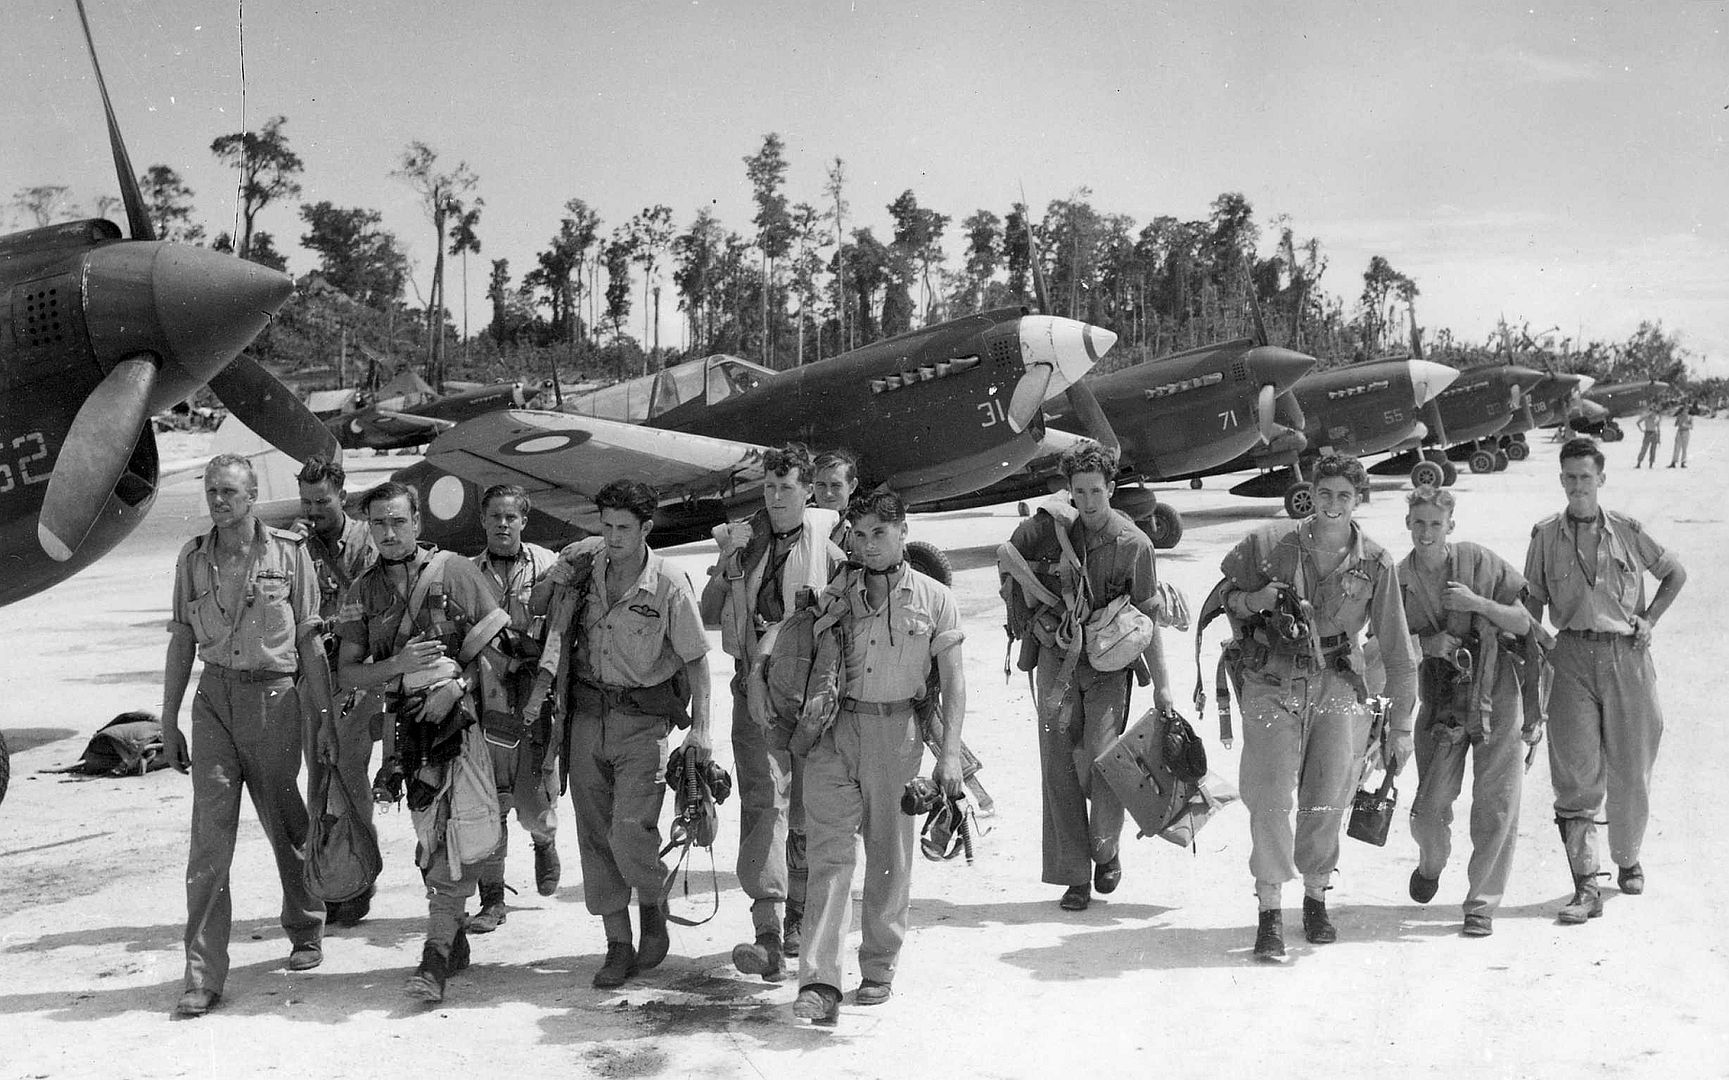 Kittyhawk Squadron Based At Noemfoor Returning From A Daily Strike